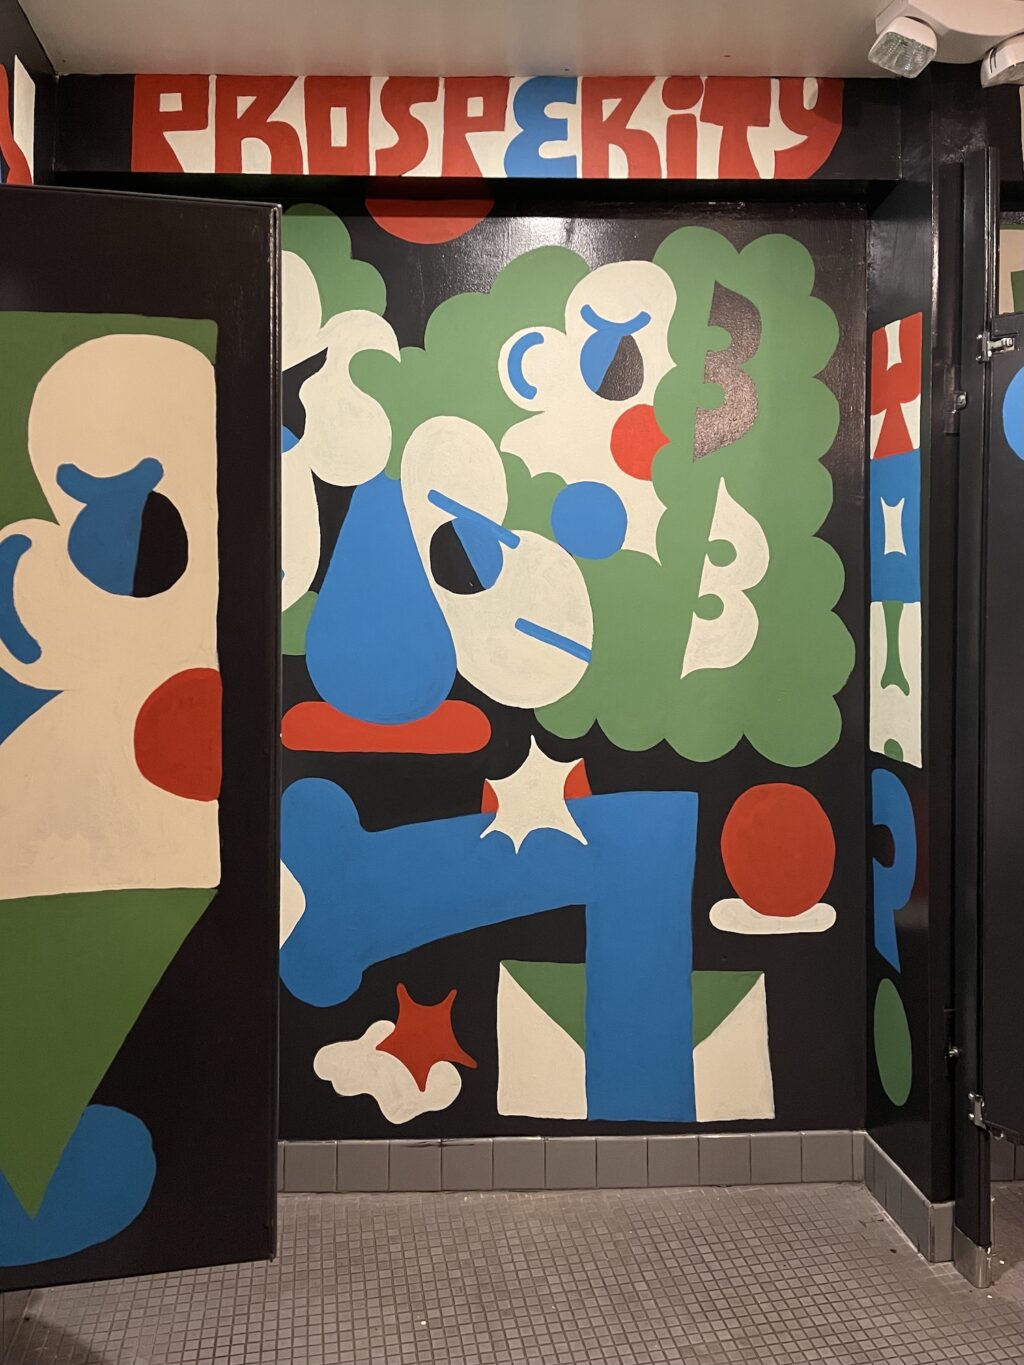 A mural in the SPACE restroom in blue, green, white, red, and black that is graphic shapes, cloud bursts, and faces with the word "Prosperity" written overhead. 